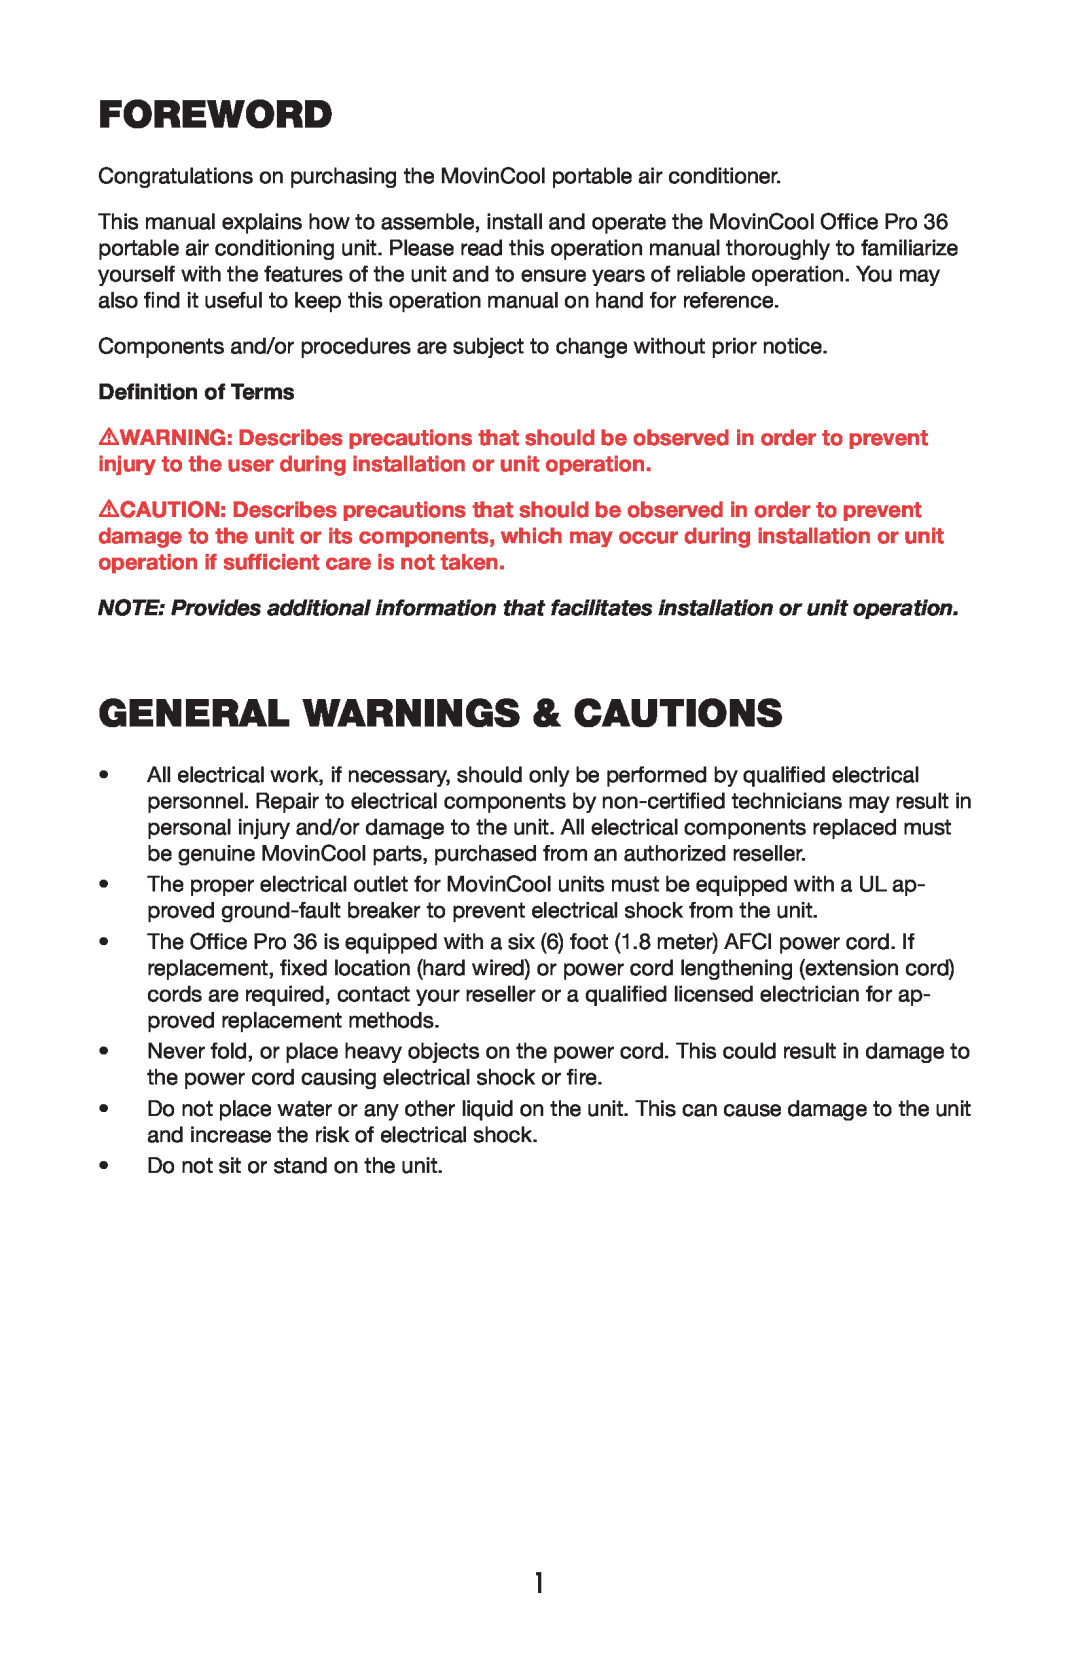 Denso OFFICE PRO 36 operation manual Foreword, General Warnings & Cautions, Deﬁnition of Terms 